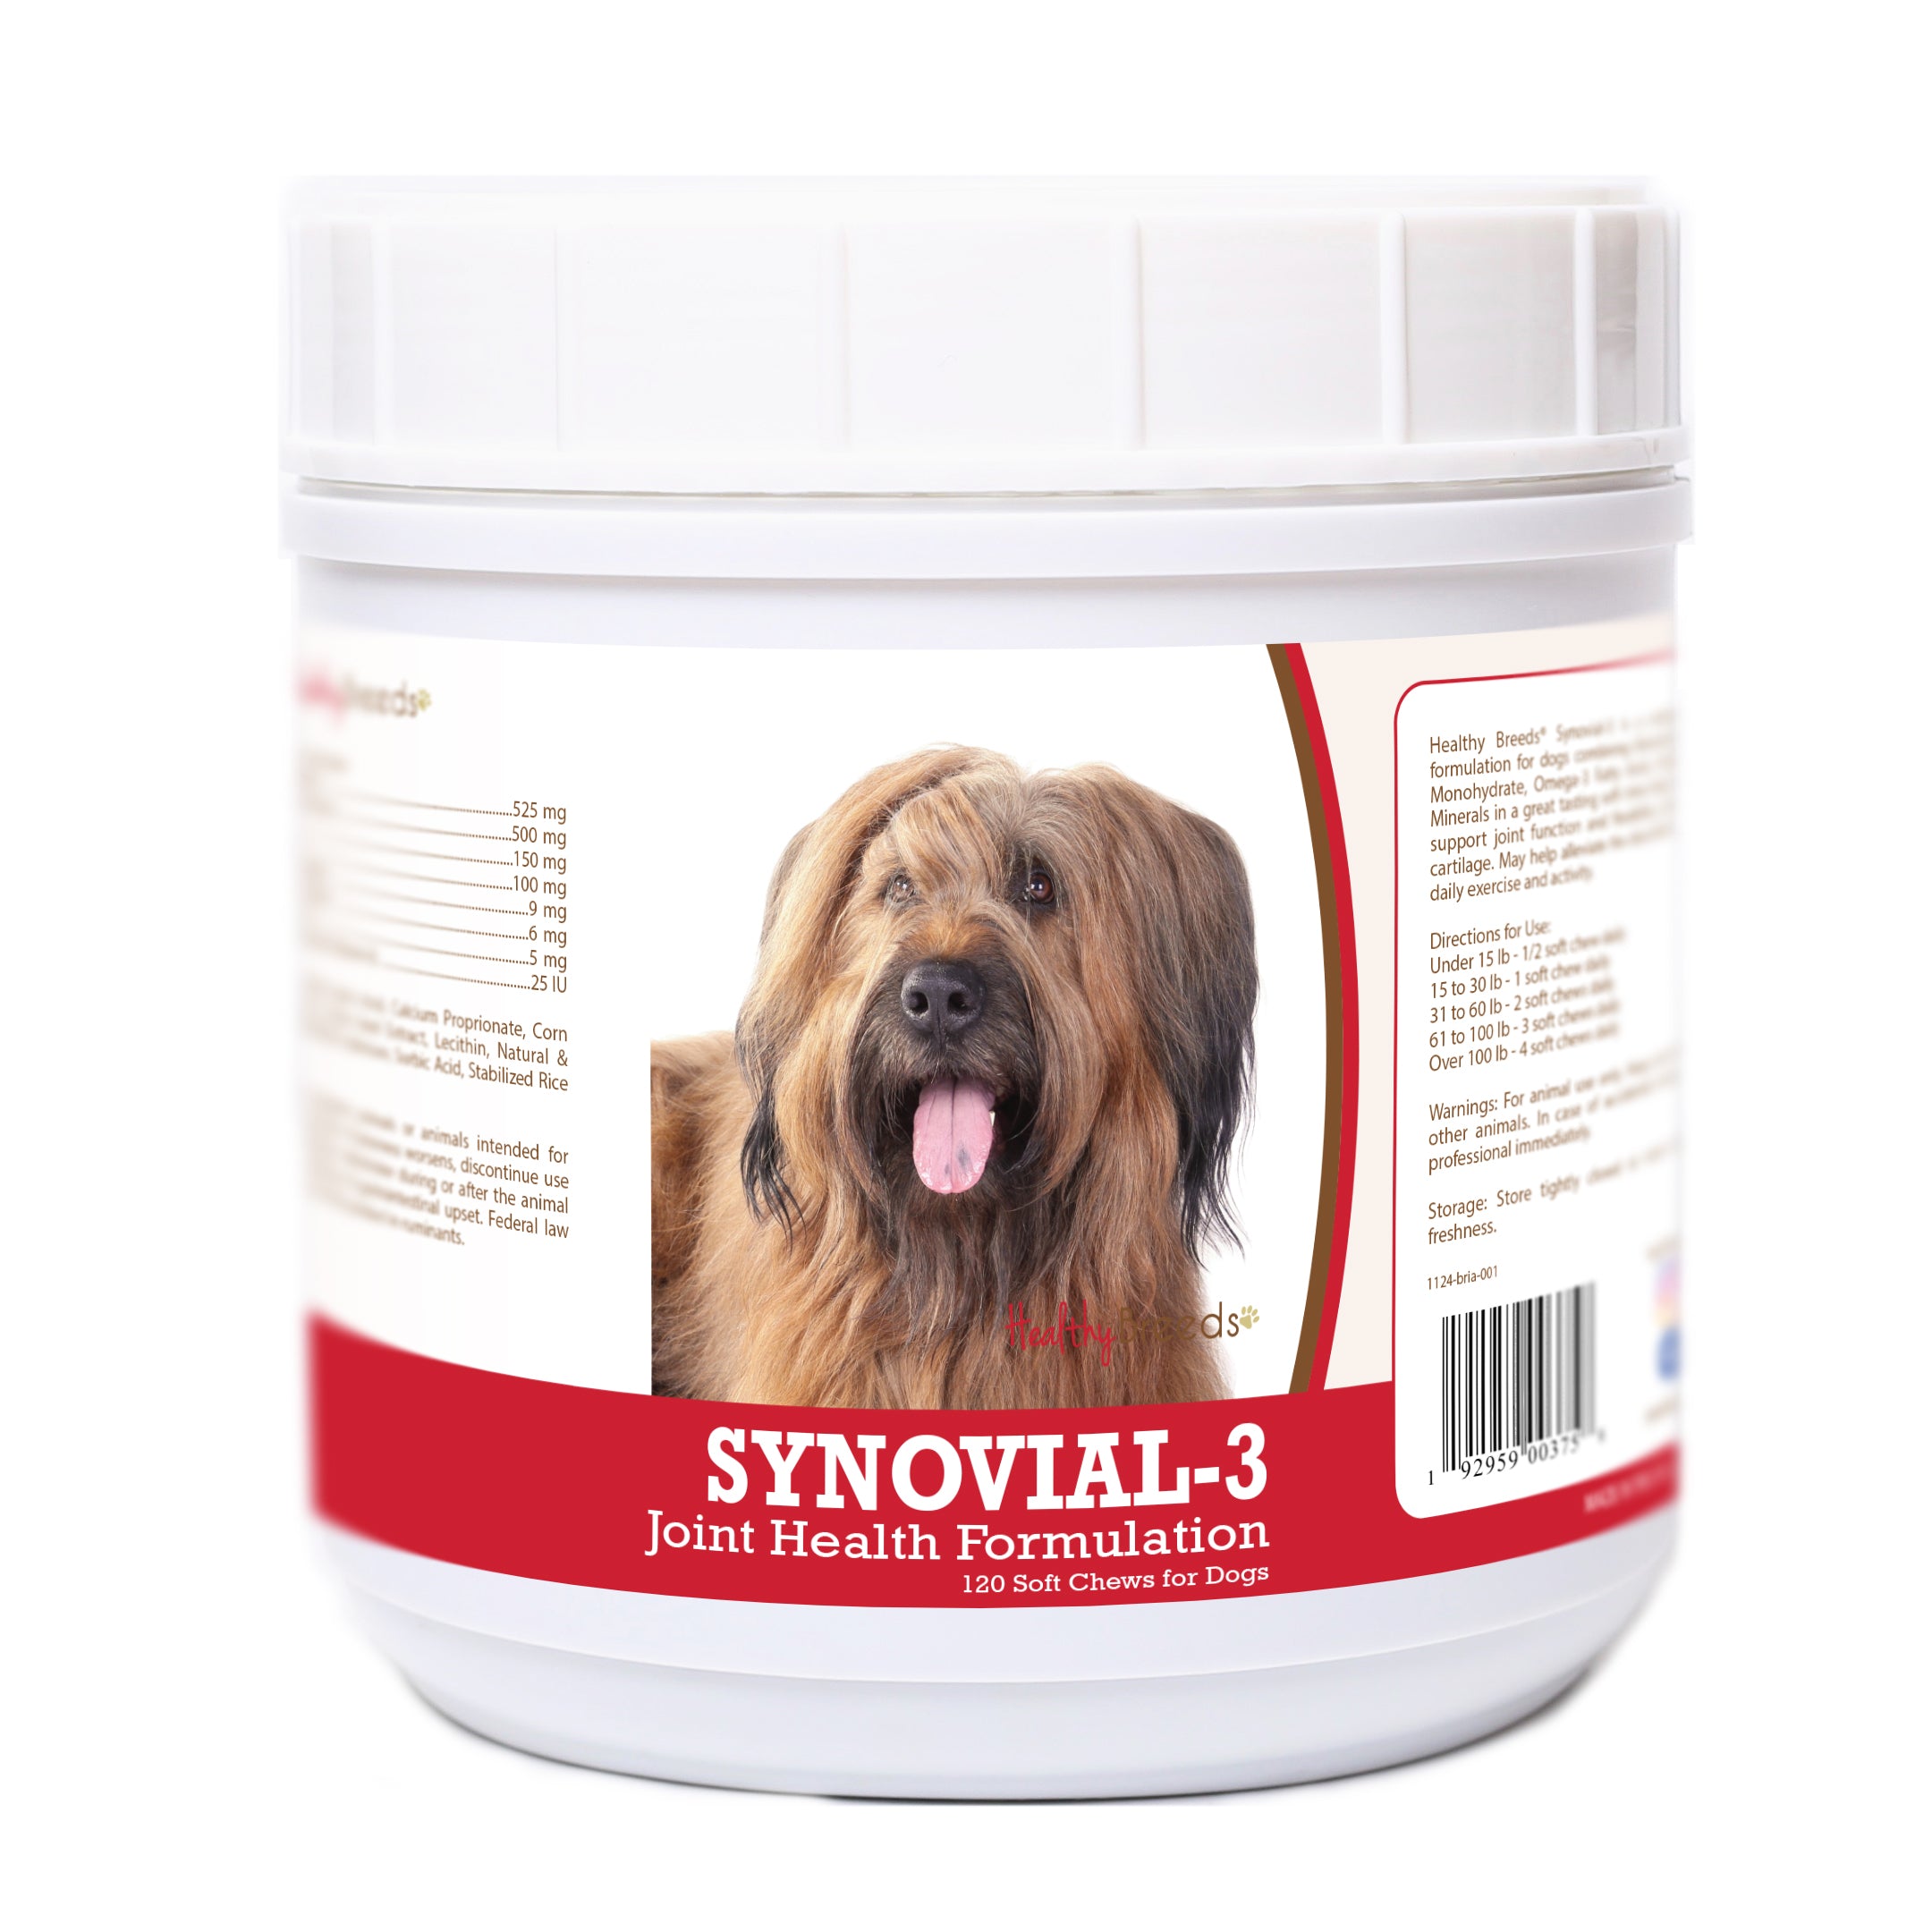 Briard Synovial-3 Joint Health Formulation Soft Chews 120 Count